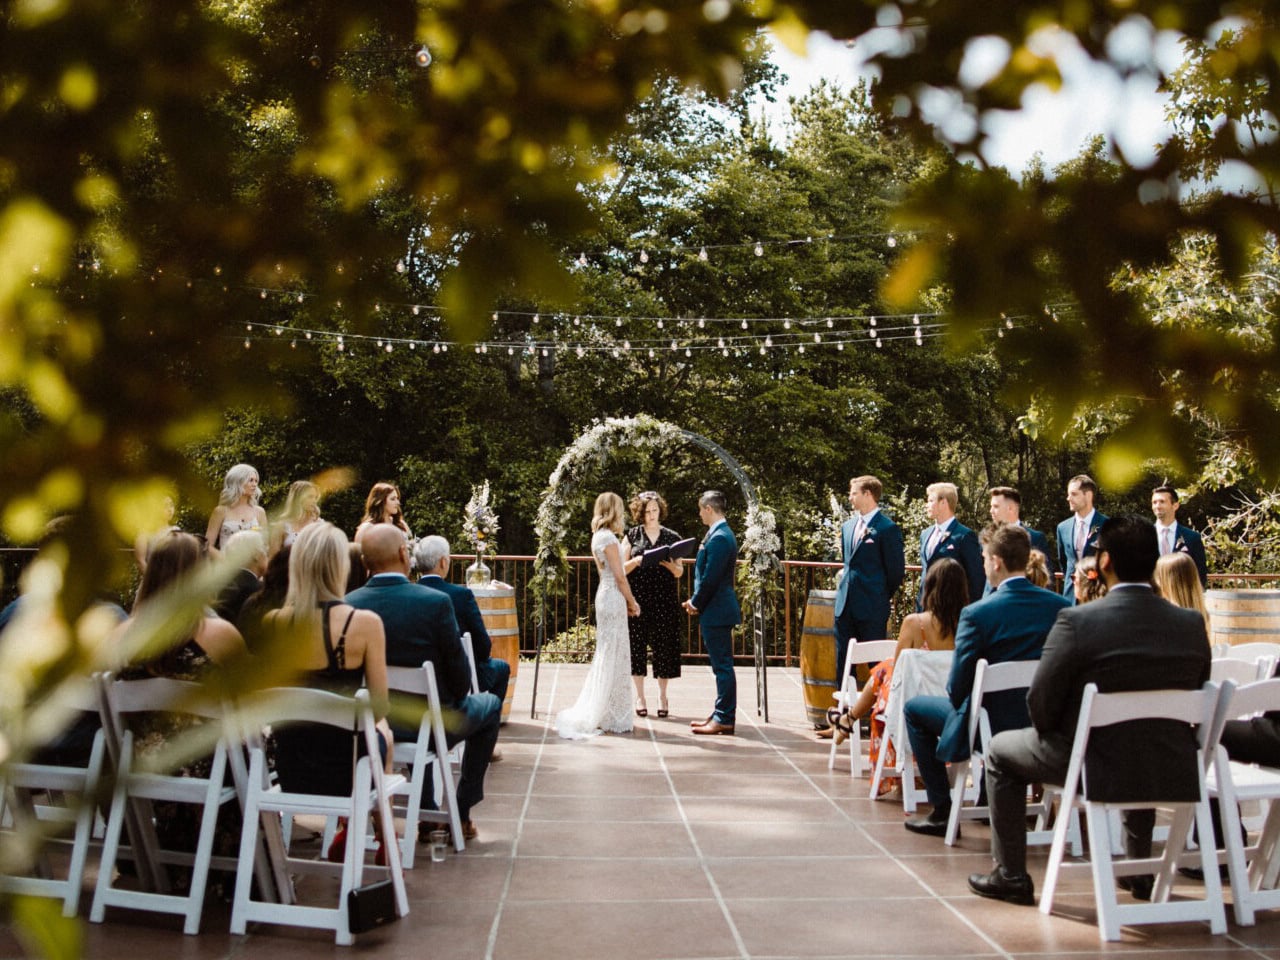 How To Plan An Outdoor Wedding On A Budget